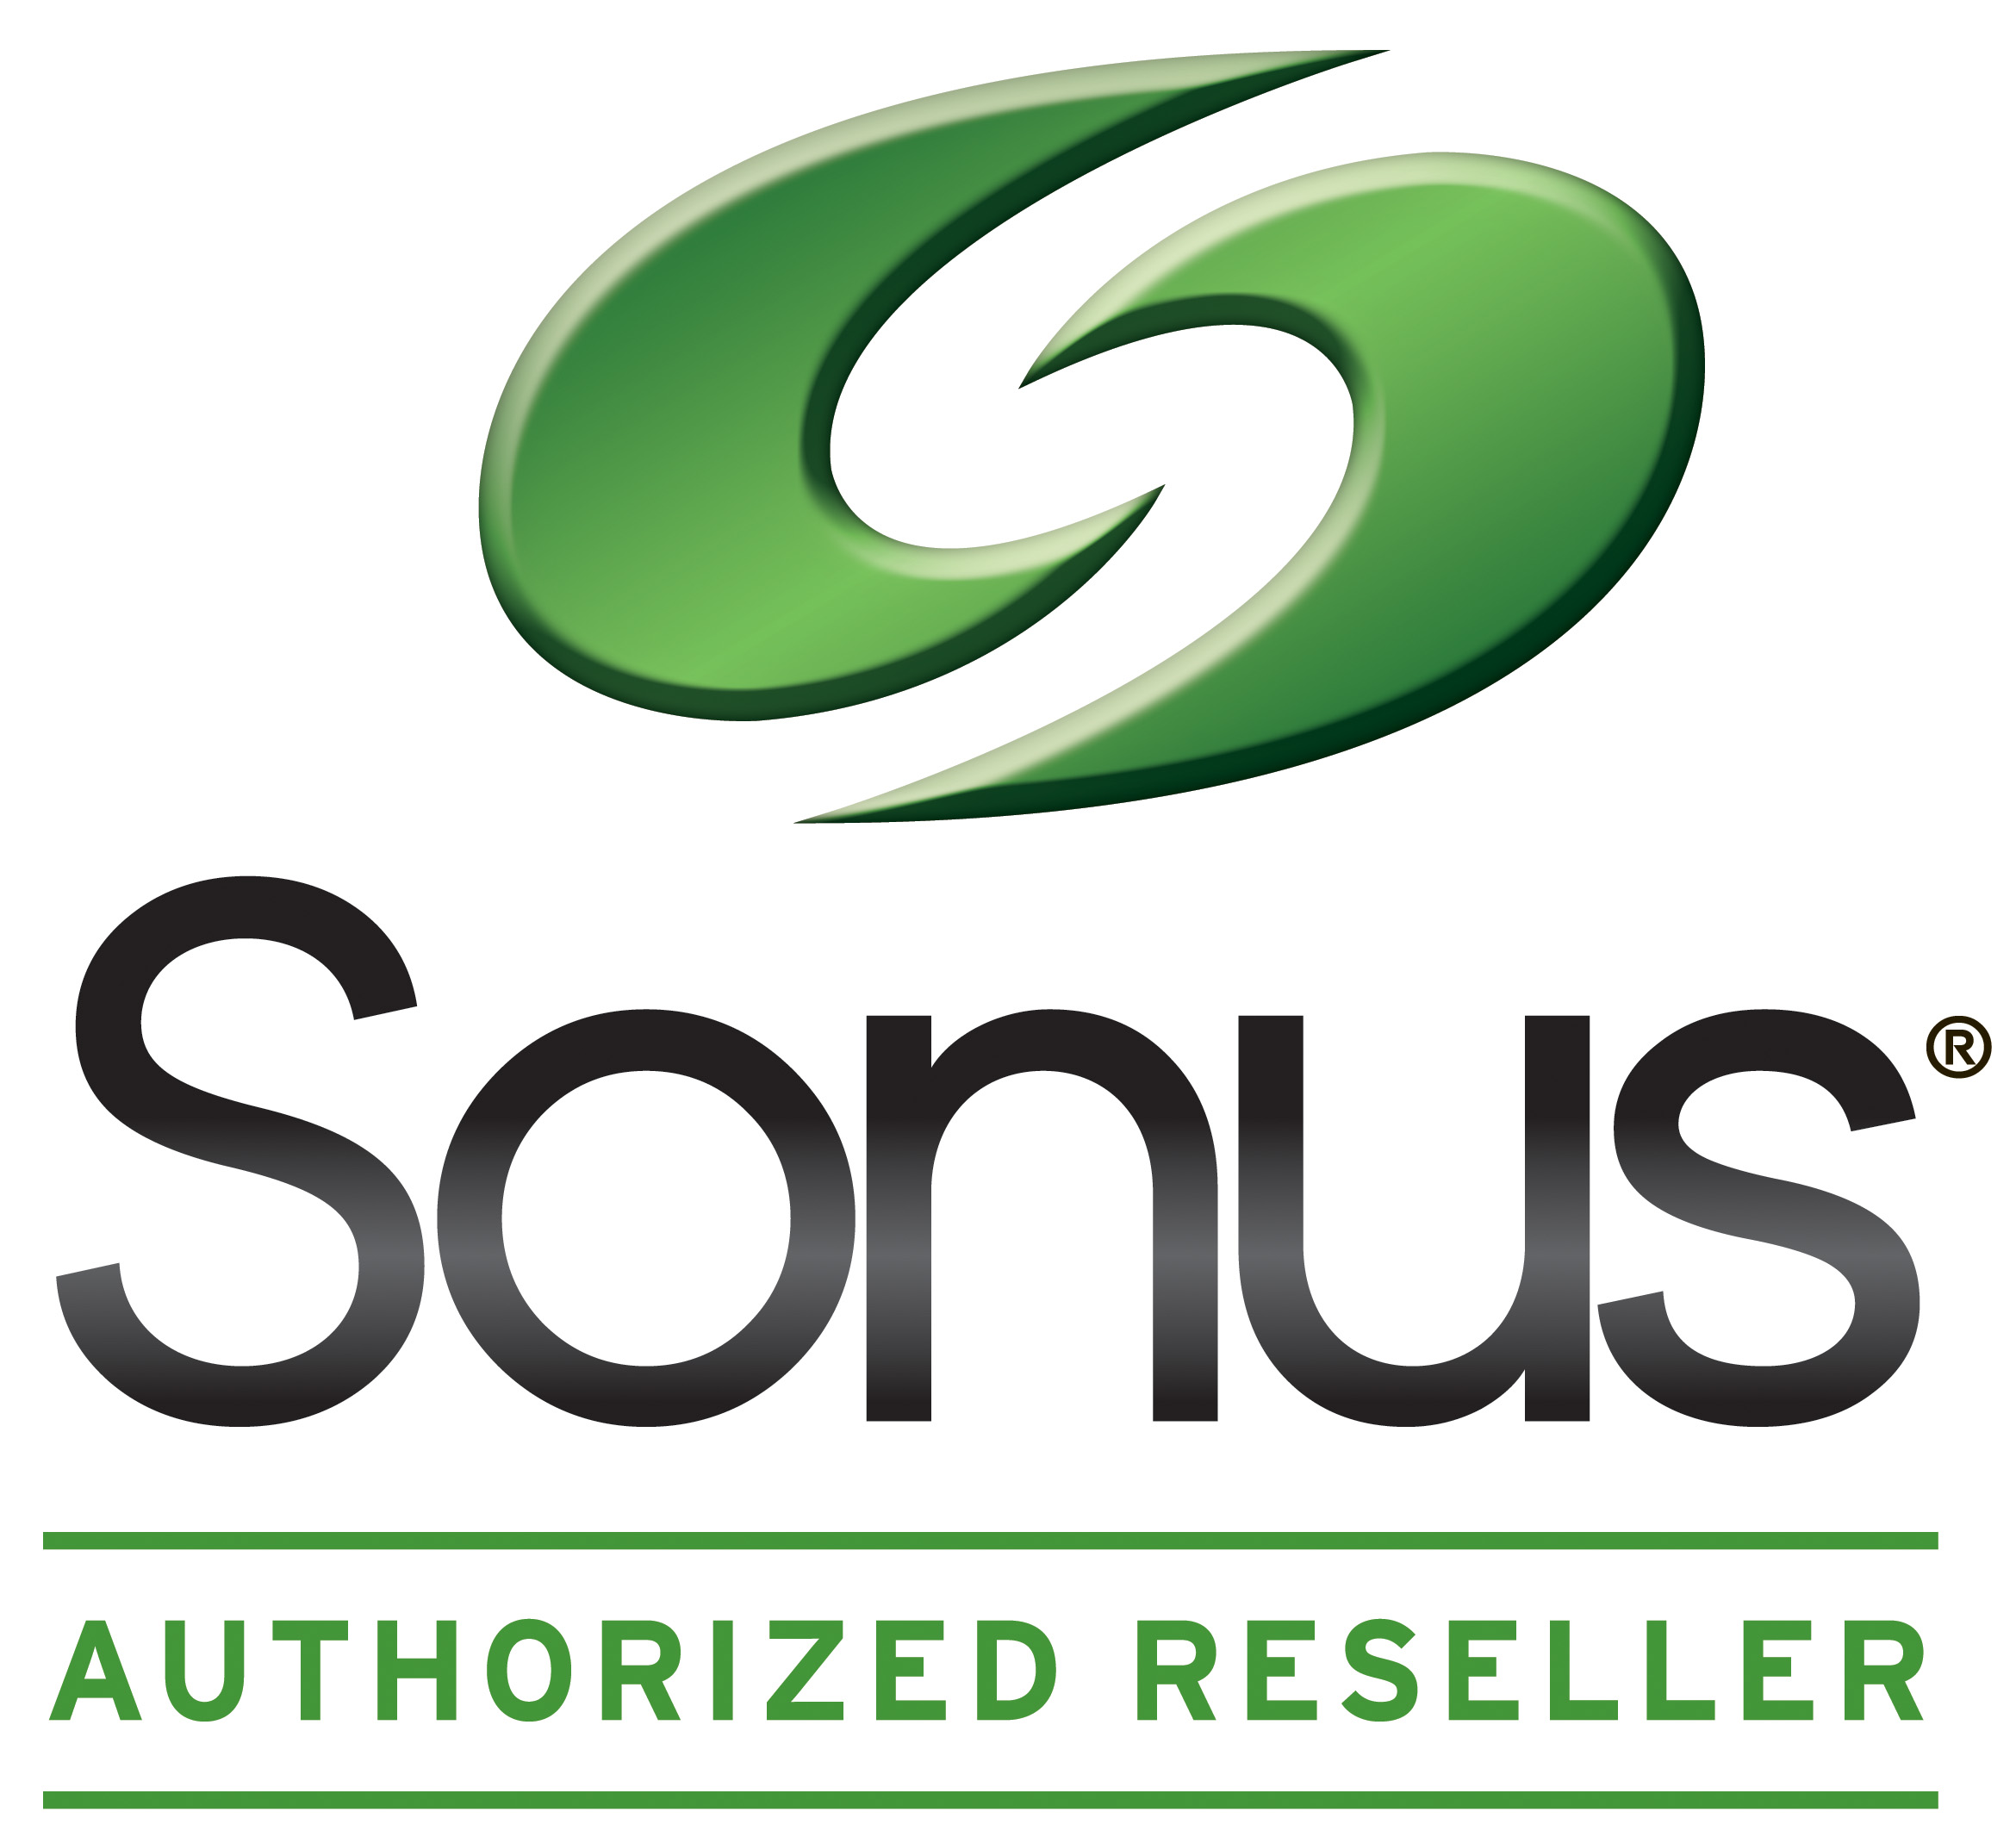 Sonus - Sonus enables and secures real-time communications so the world's leading service providers and enterprises can embrace the next generation of 4G/LTE solutions including VOIP, Video, Instant Messaging and online collaboration